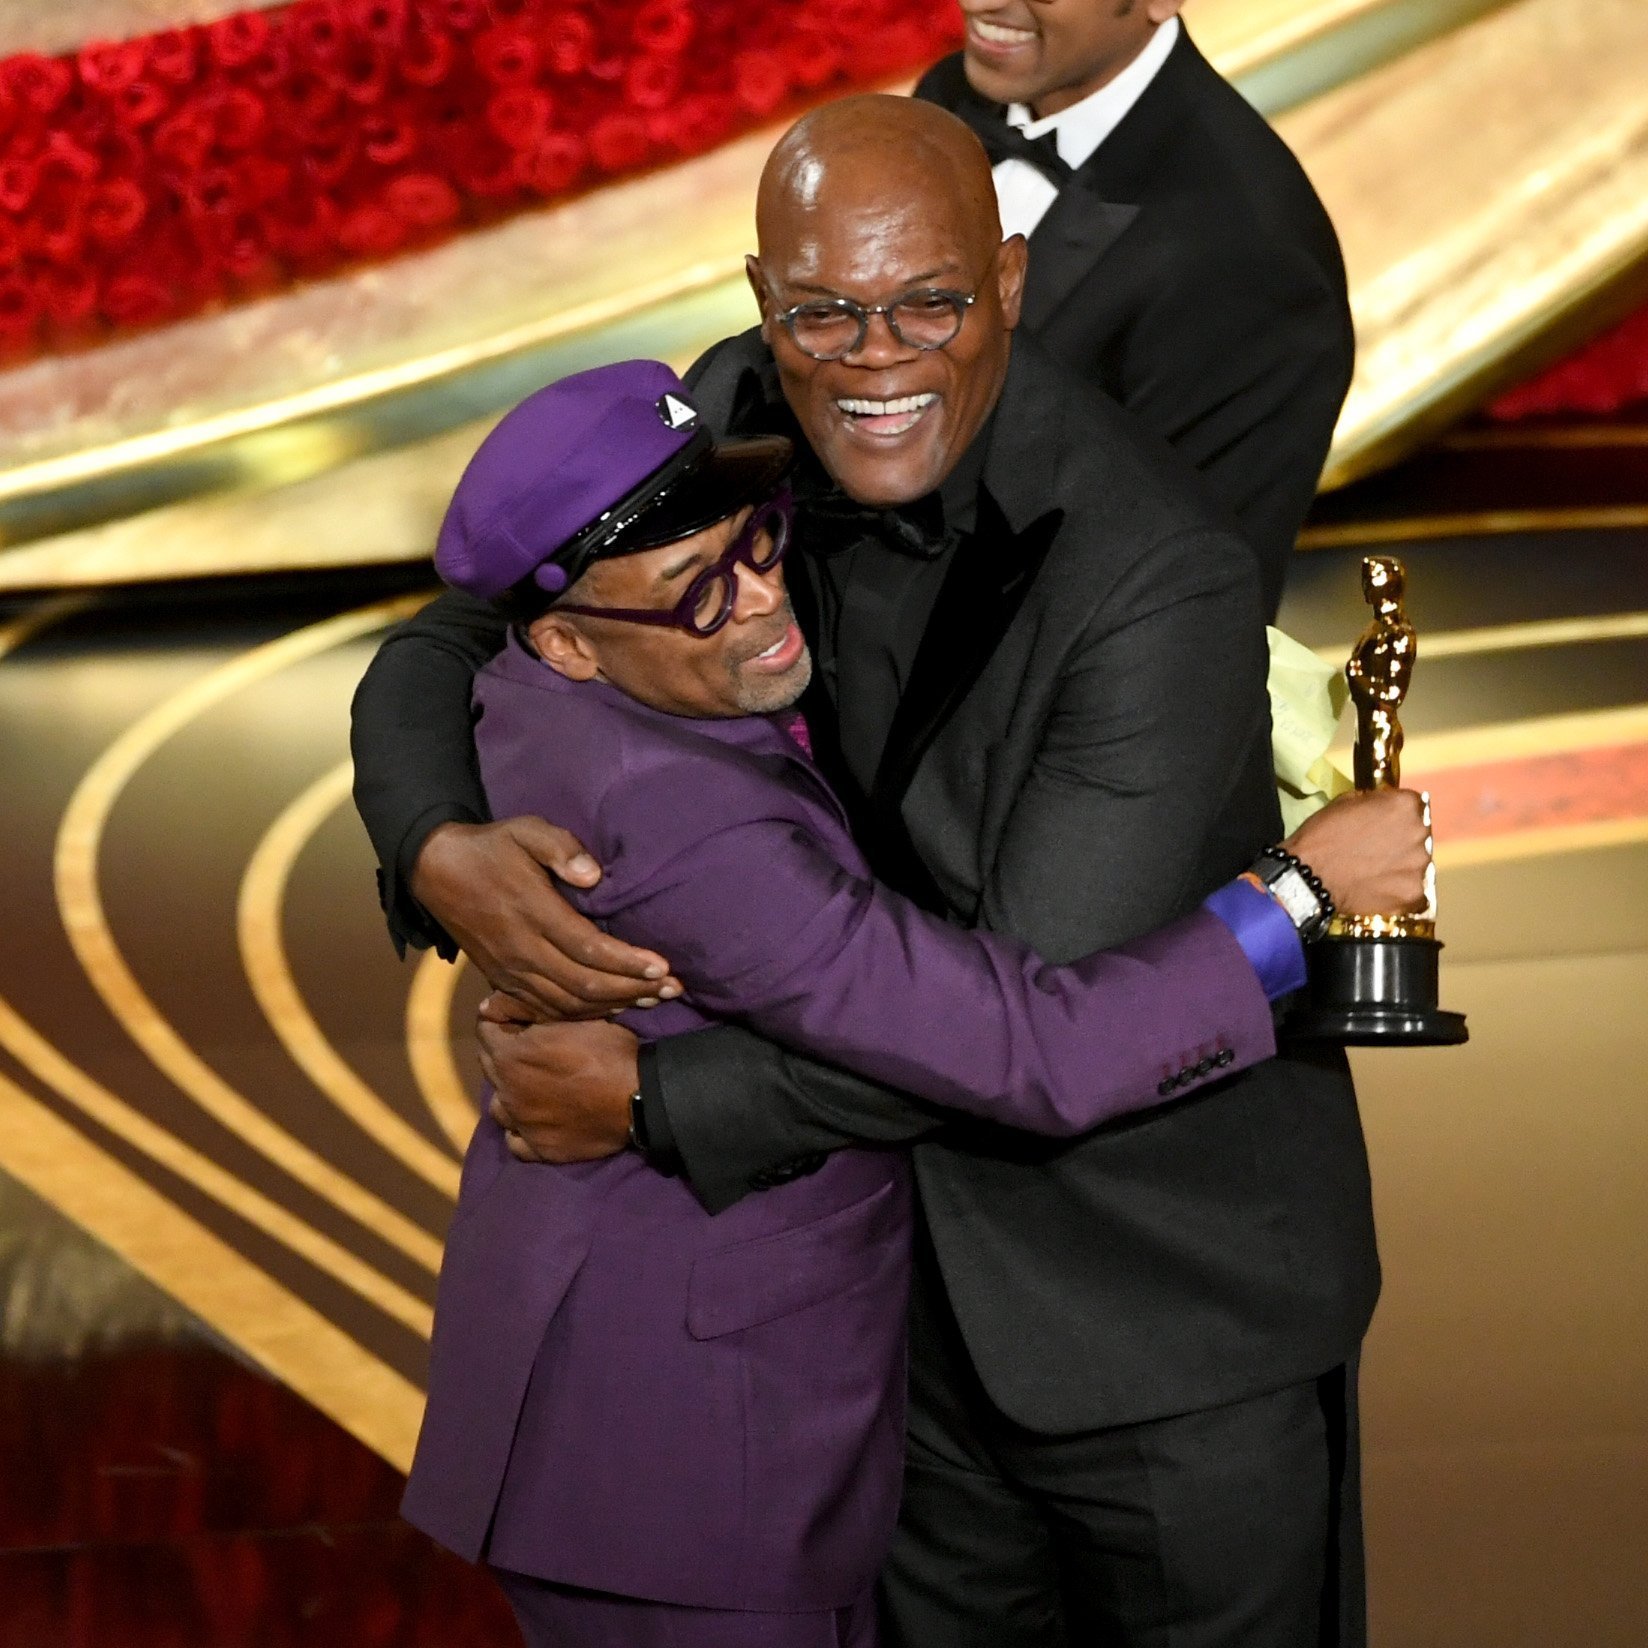 Samuel L Jackson hugging Spike Lee at the 2019 Academy Awards | Photo: Getty Images